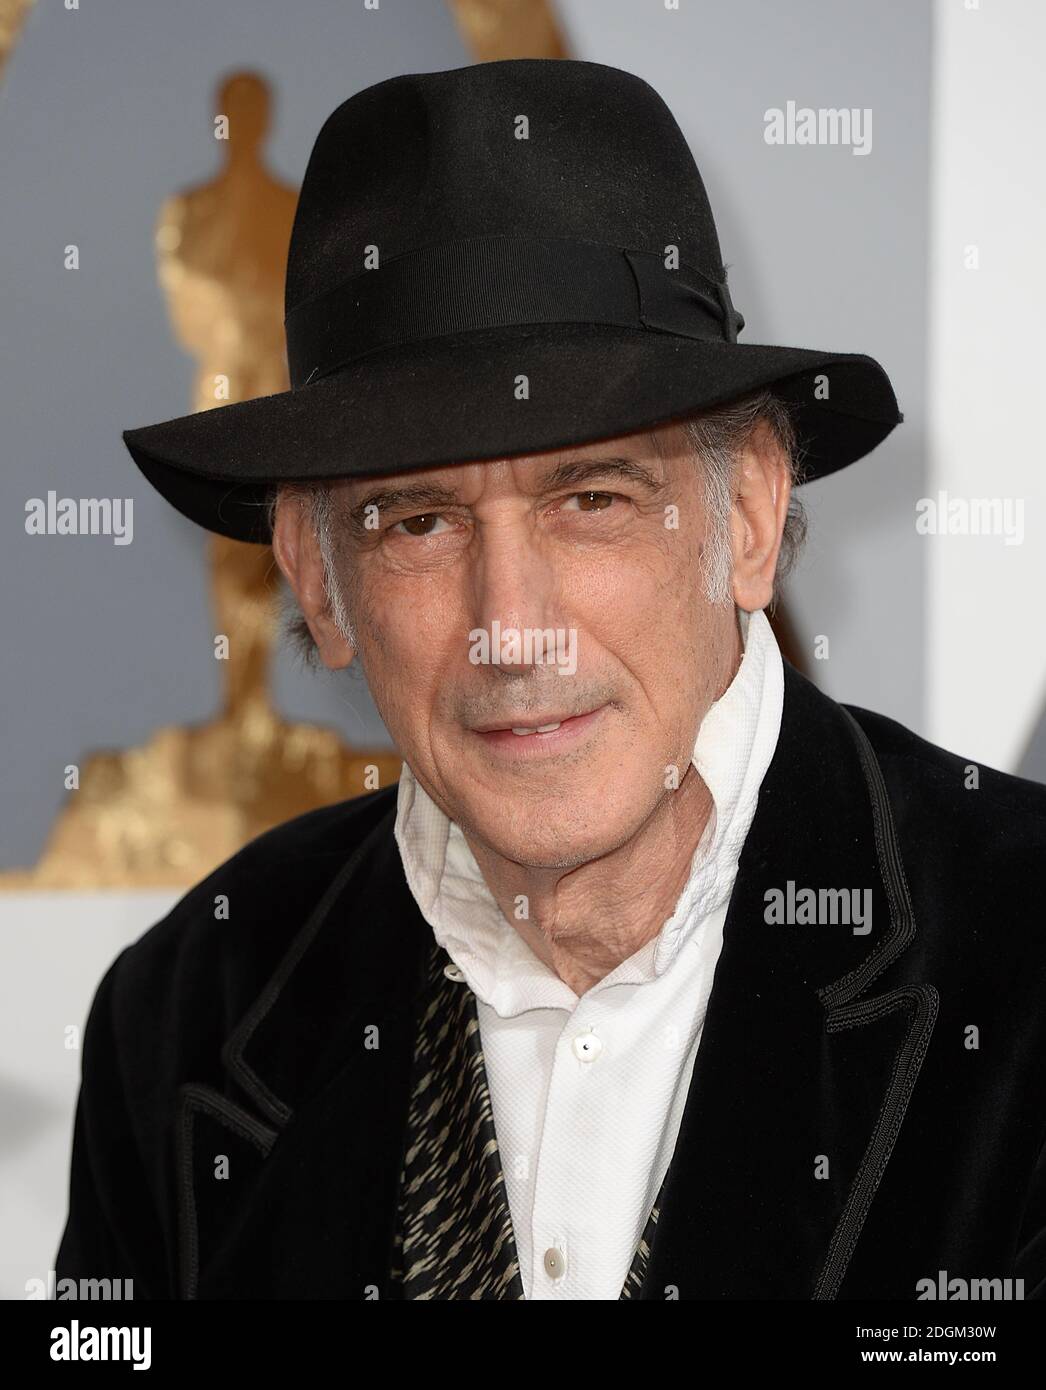 Edward Lachman arriving at the 88th Academy Awards held at the Dolby Theatre in Hollywood, Los Angeles, CA, USA, February 28, 2016. Stock Photo